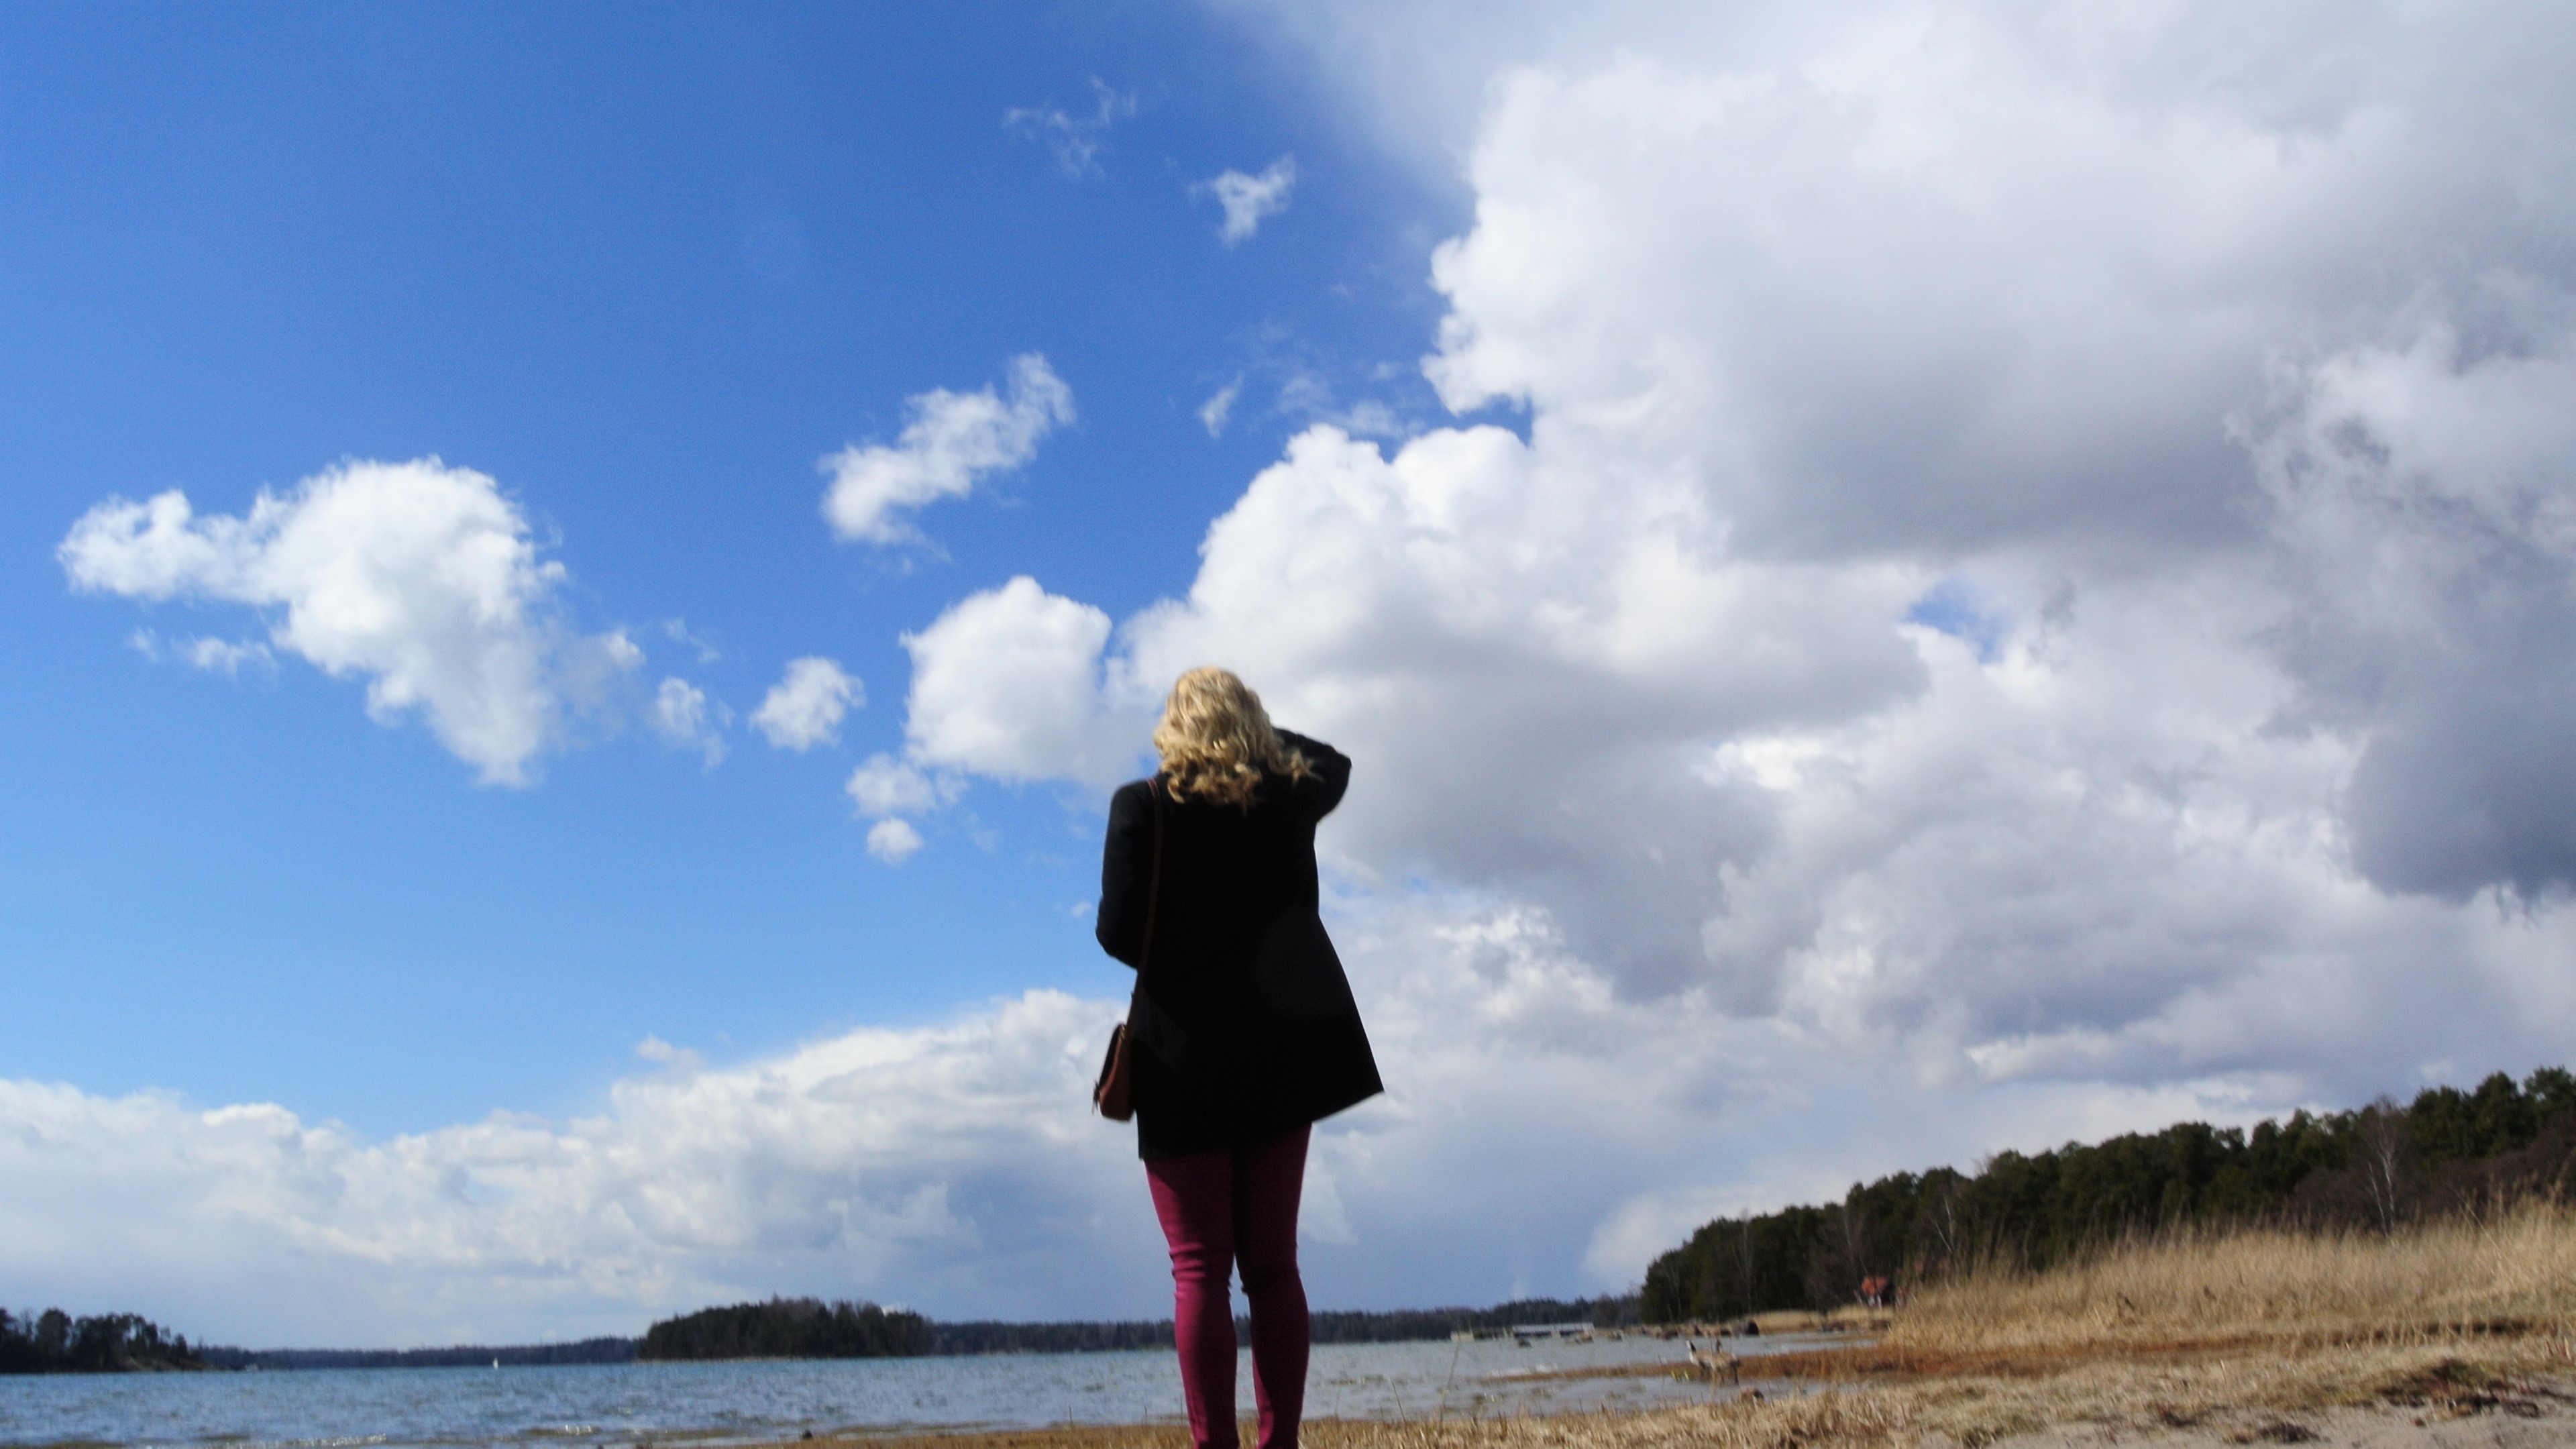 Kallahdenniemi A blonde girl standing on a beach looking at the blue sky and white clouds